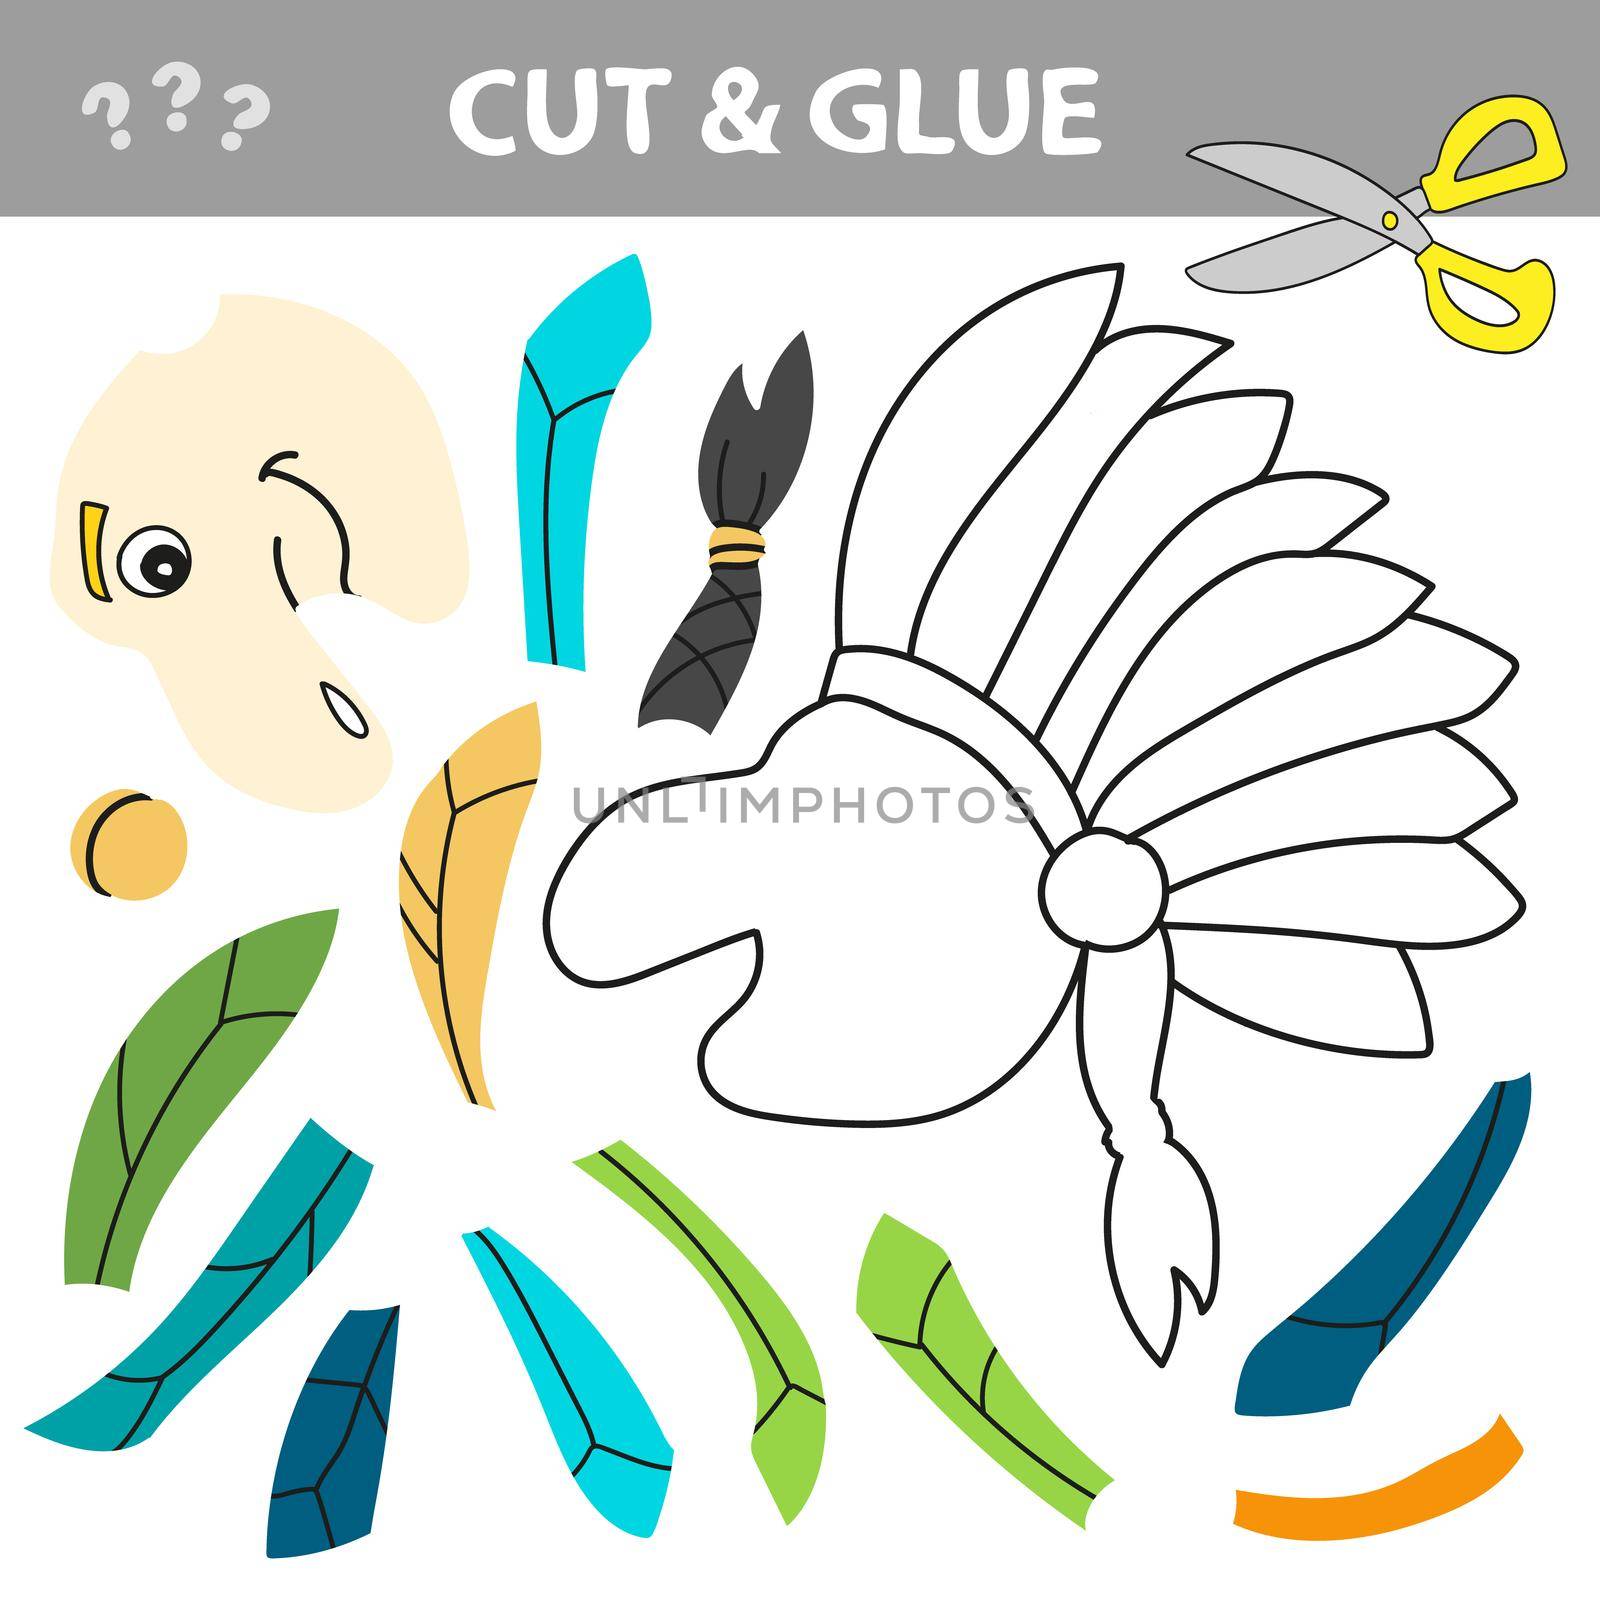 Cut and glue - Simple game for kids. Native Indian man with feather headdress. by natali_brill